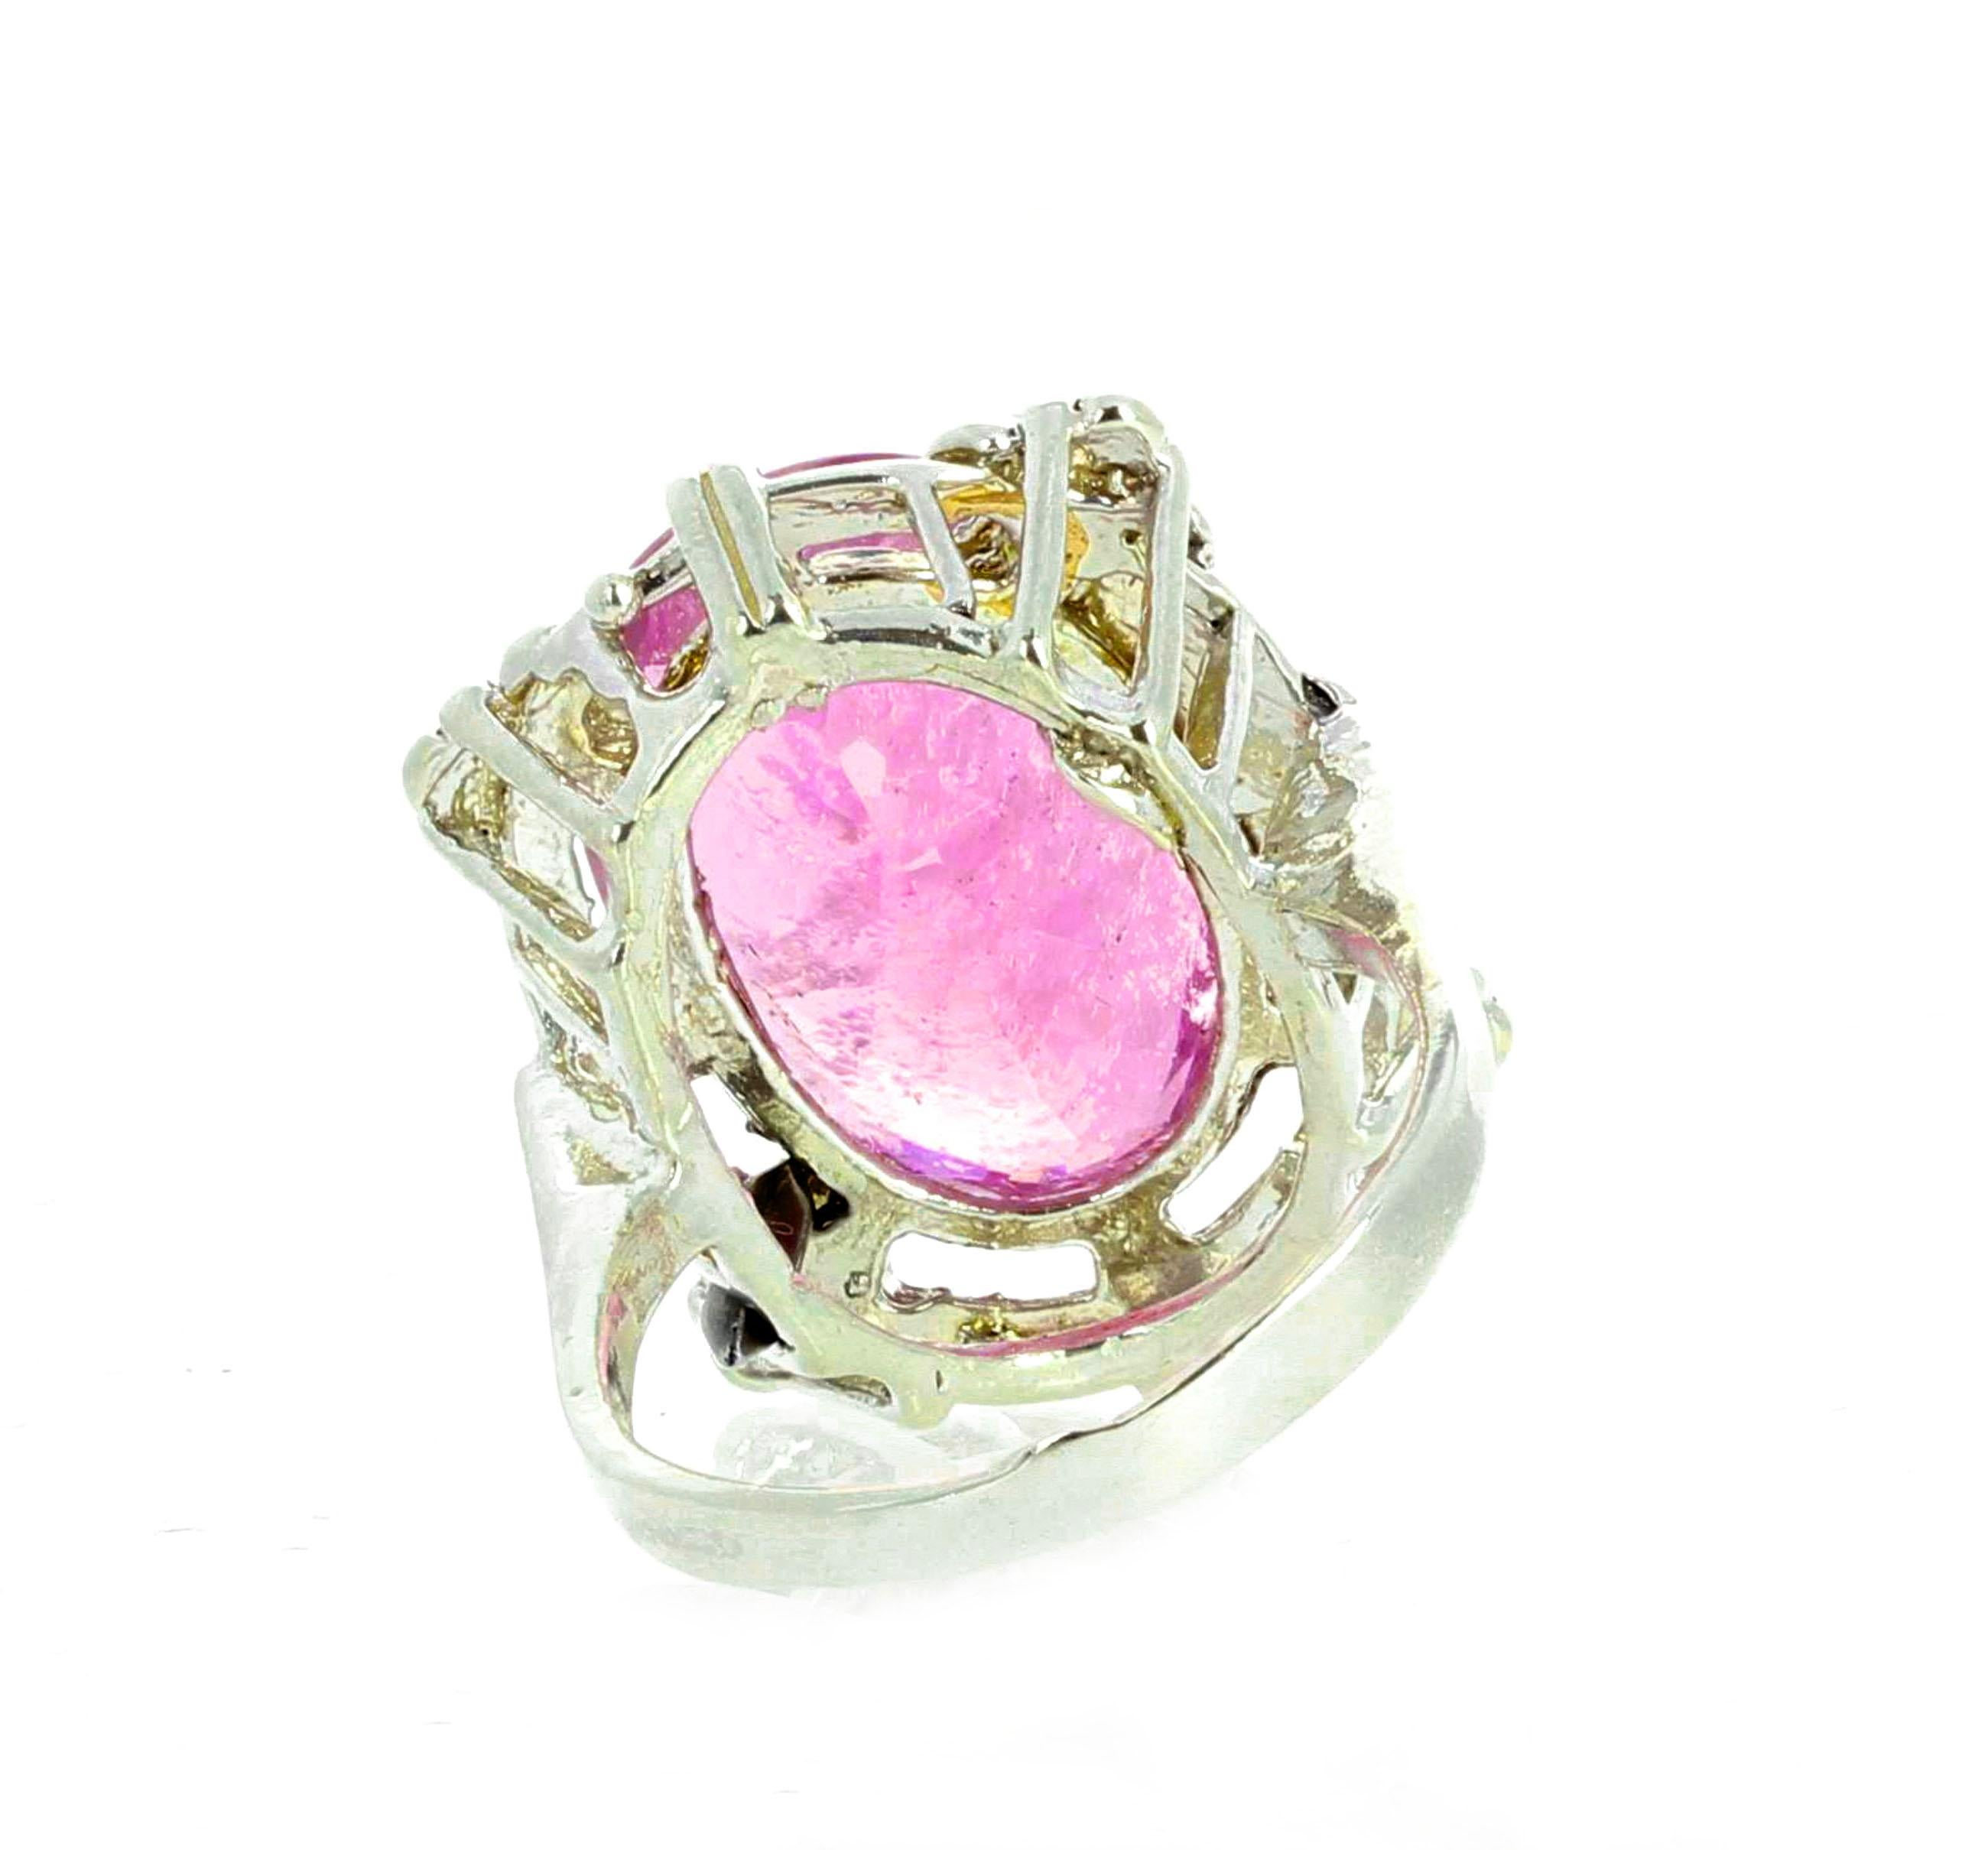 Oval Cut AJD Stunningly Magnificent 11.6 Carats Natural Brilliant Kunzite Cocktail Ring For Sale